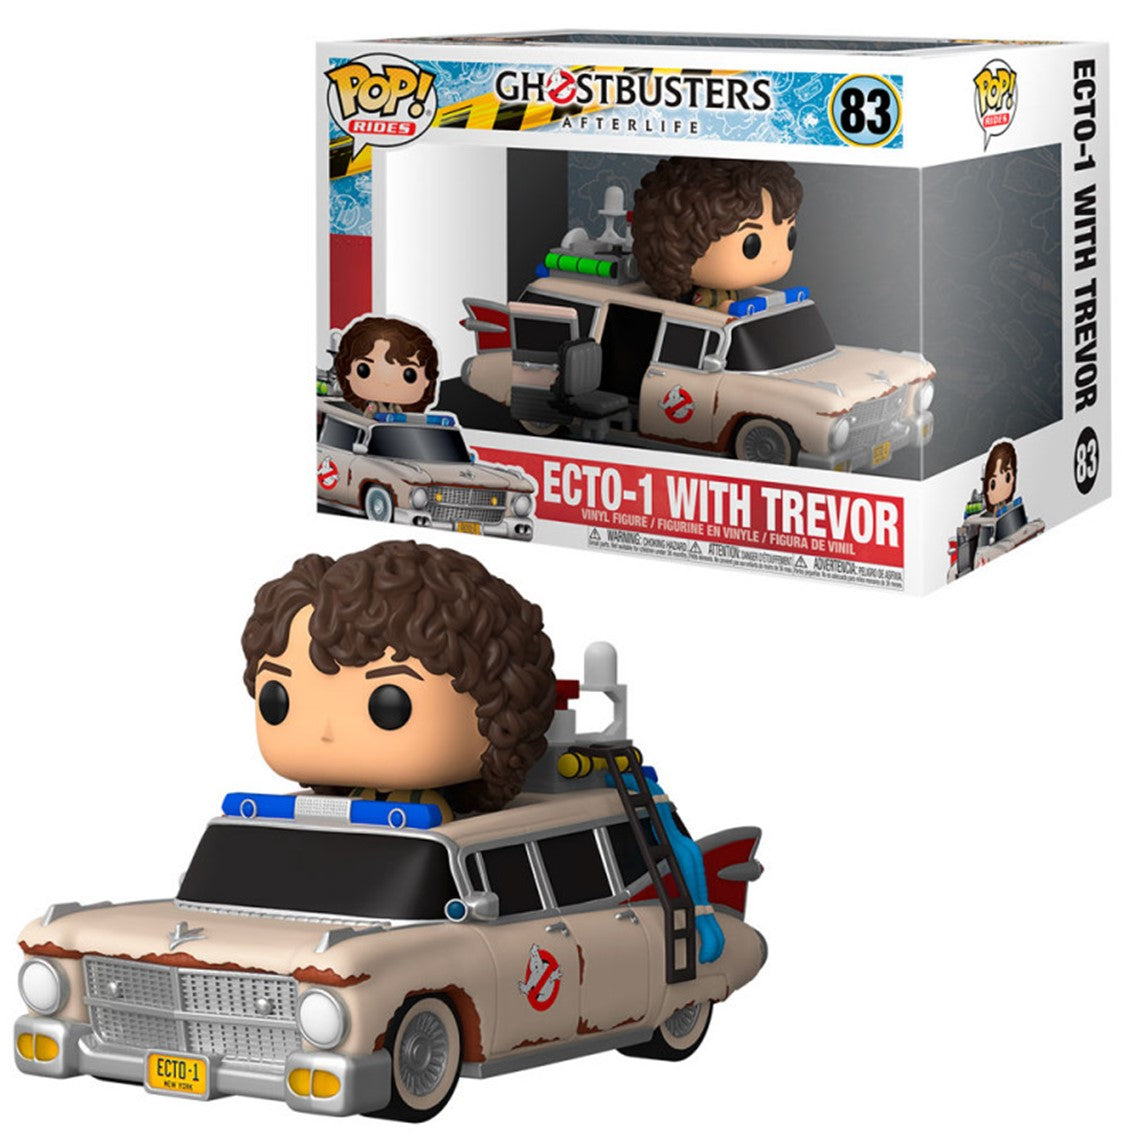 Funko POP 83 Ghostbusters Afterlife Ride Ecto 1 With Trevor Frikhala